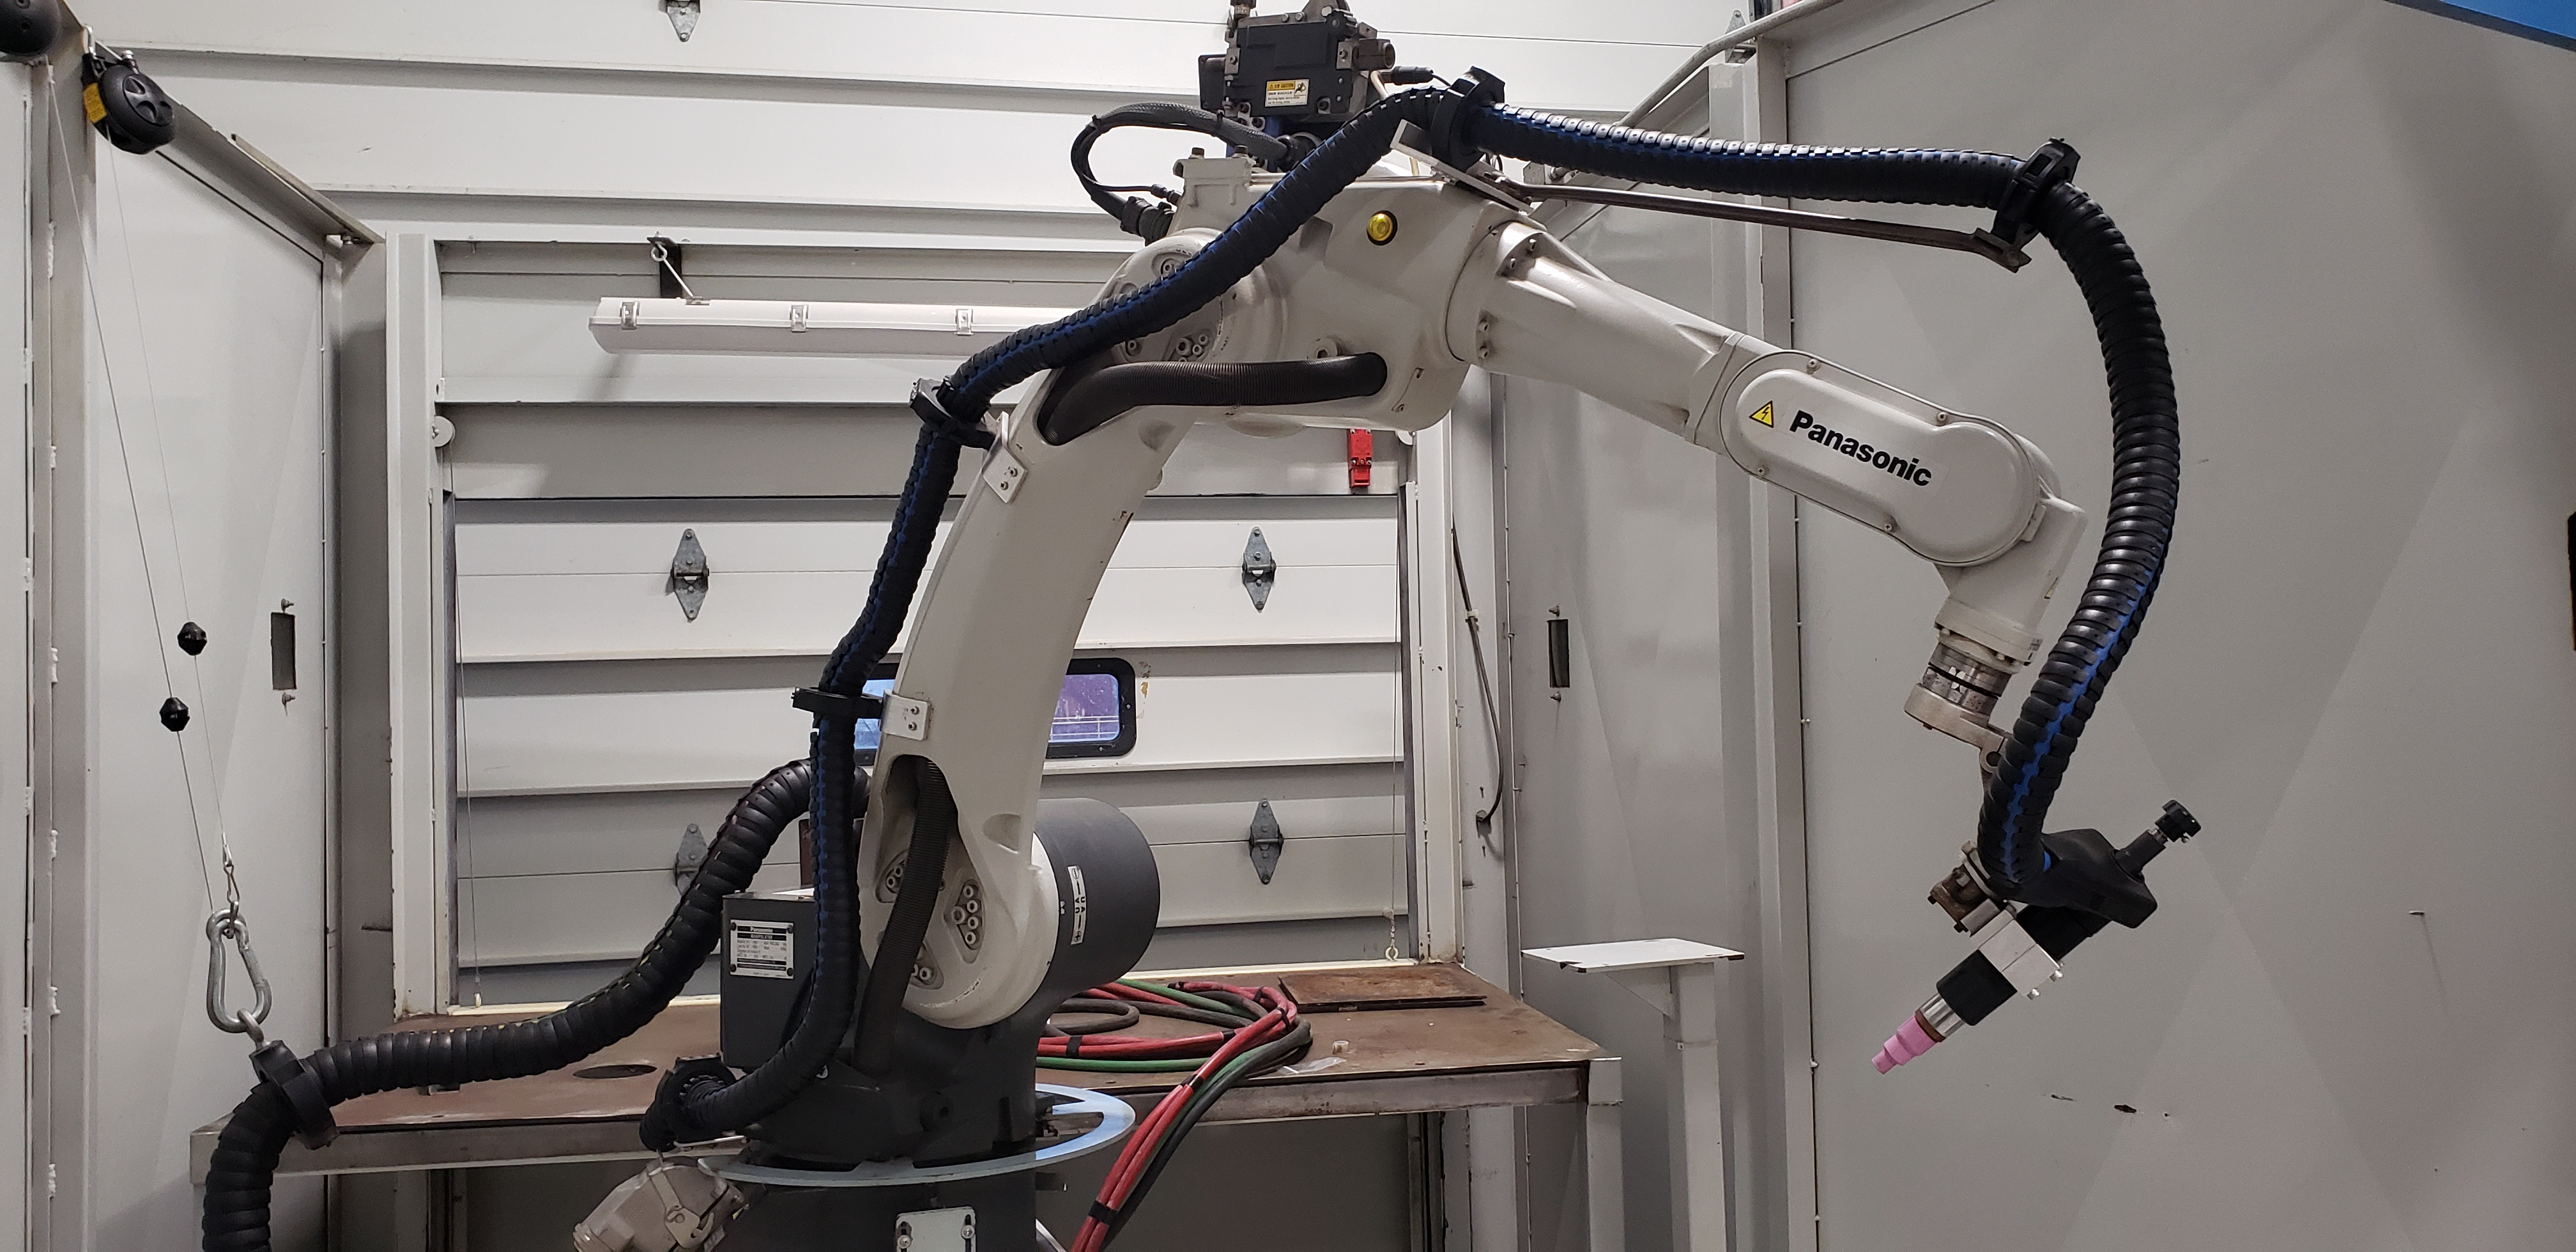 PANASONIC TA-1600 Robotic Welding Arm with ARS-1620 Welding Cell System